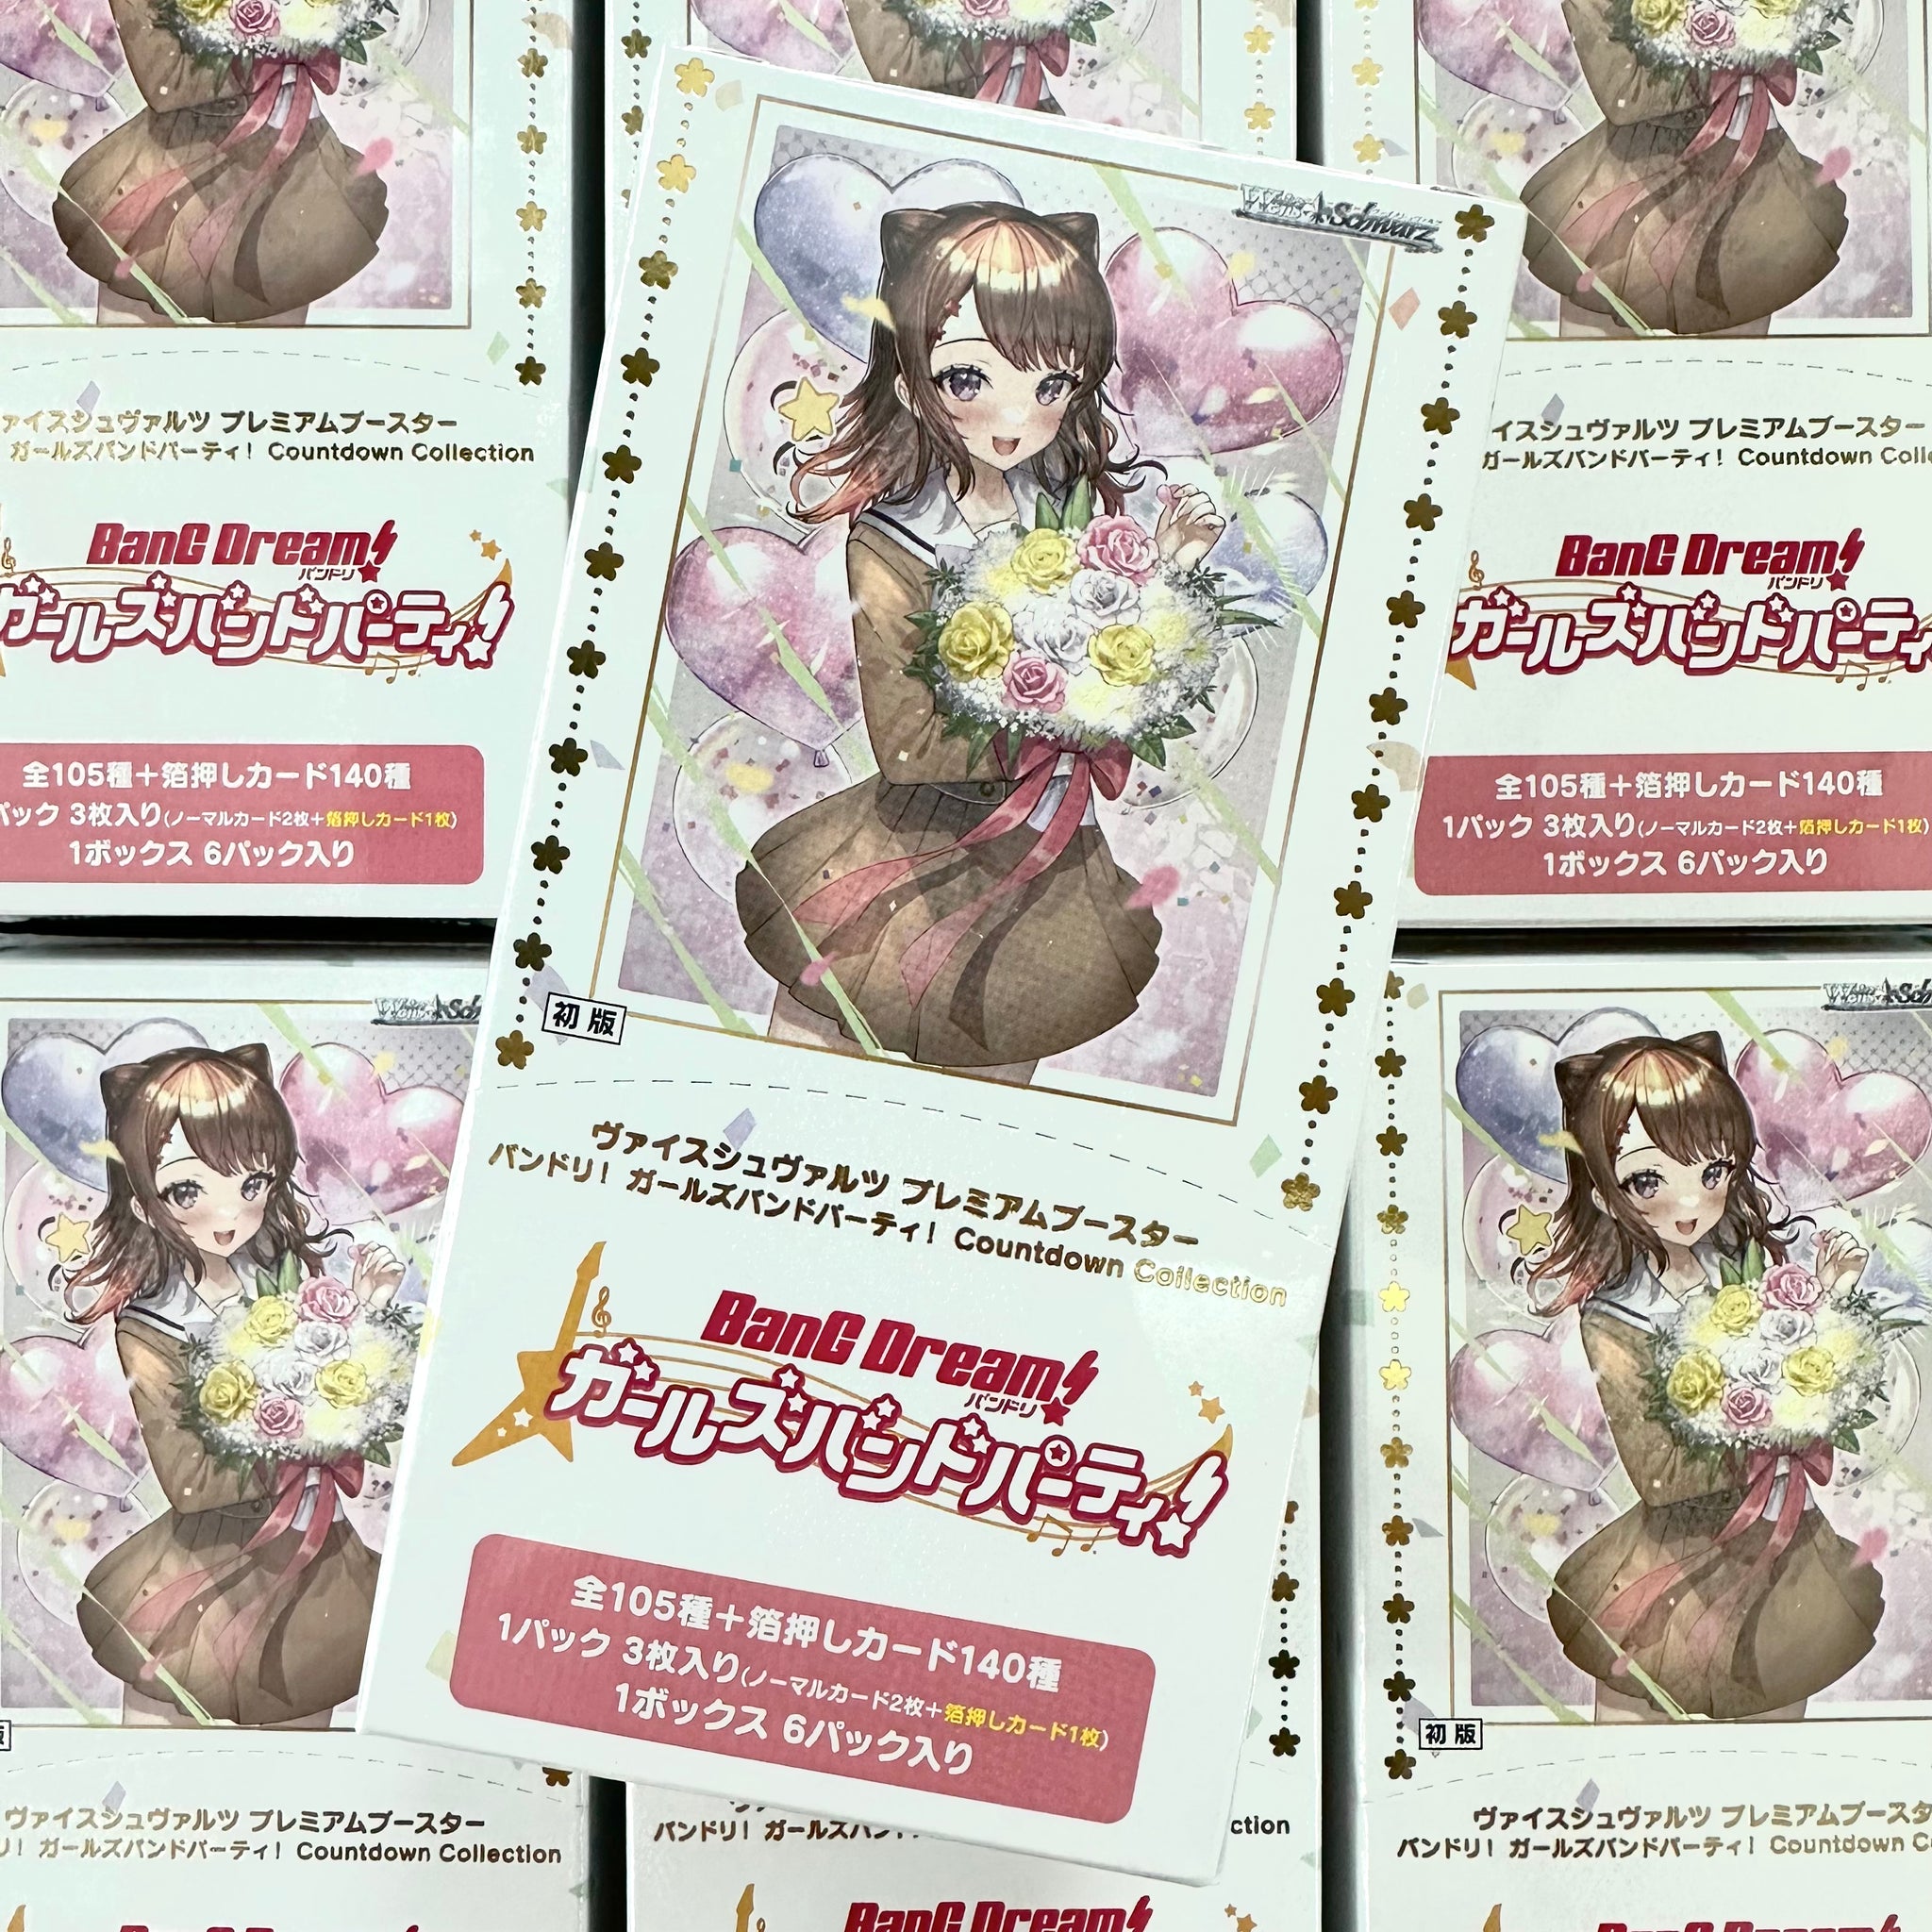 Booster Pack BanG Dream! Girls Band Party! 5th Anniversary ｜ Weiß Schwarz